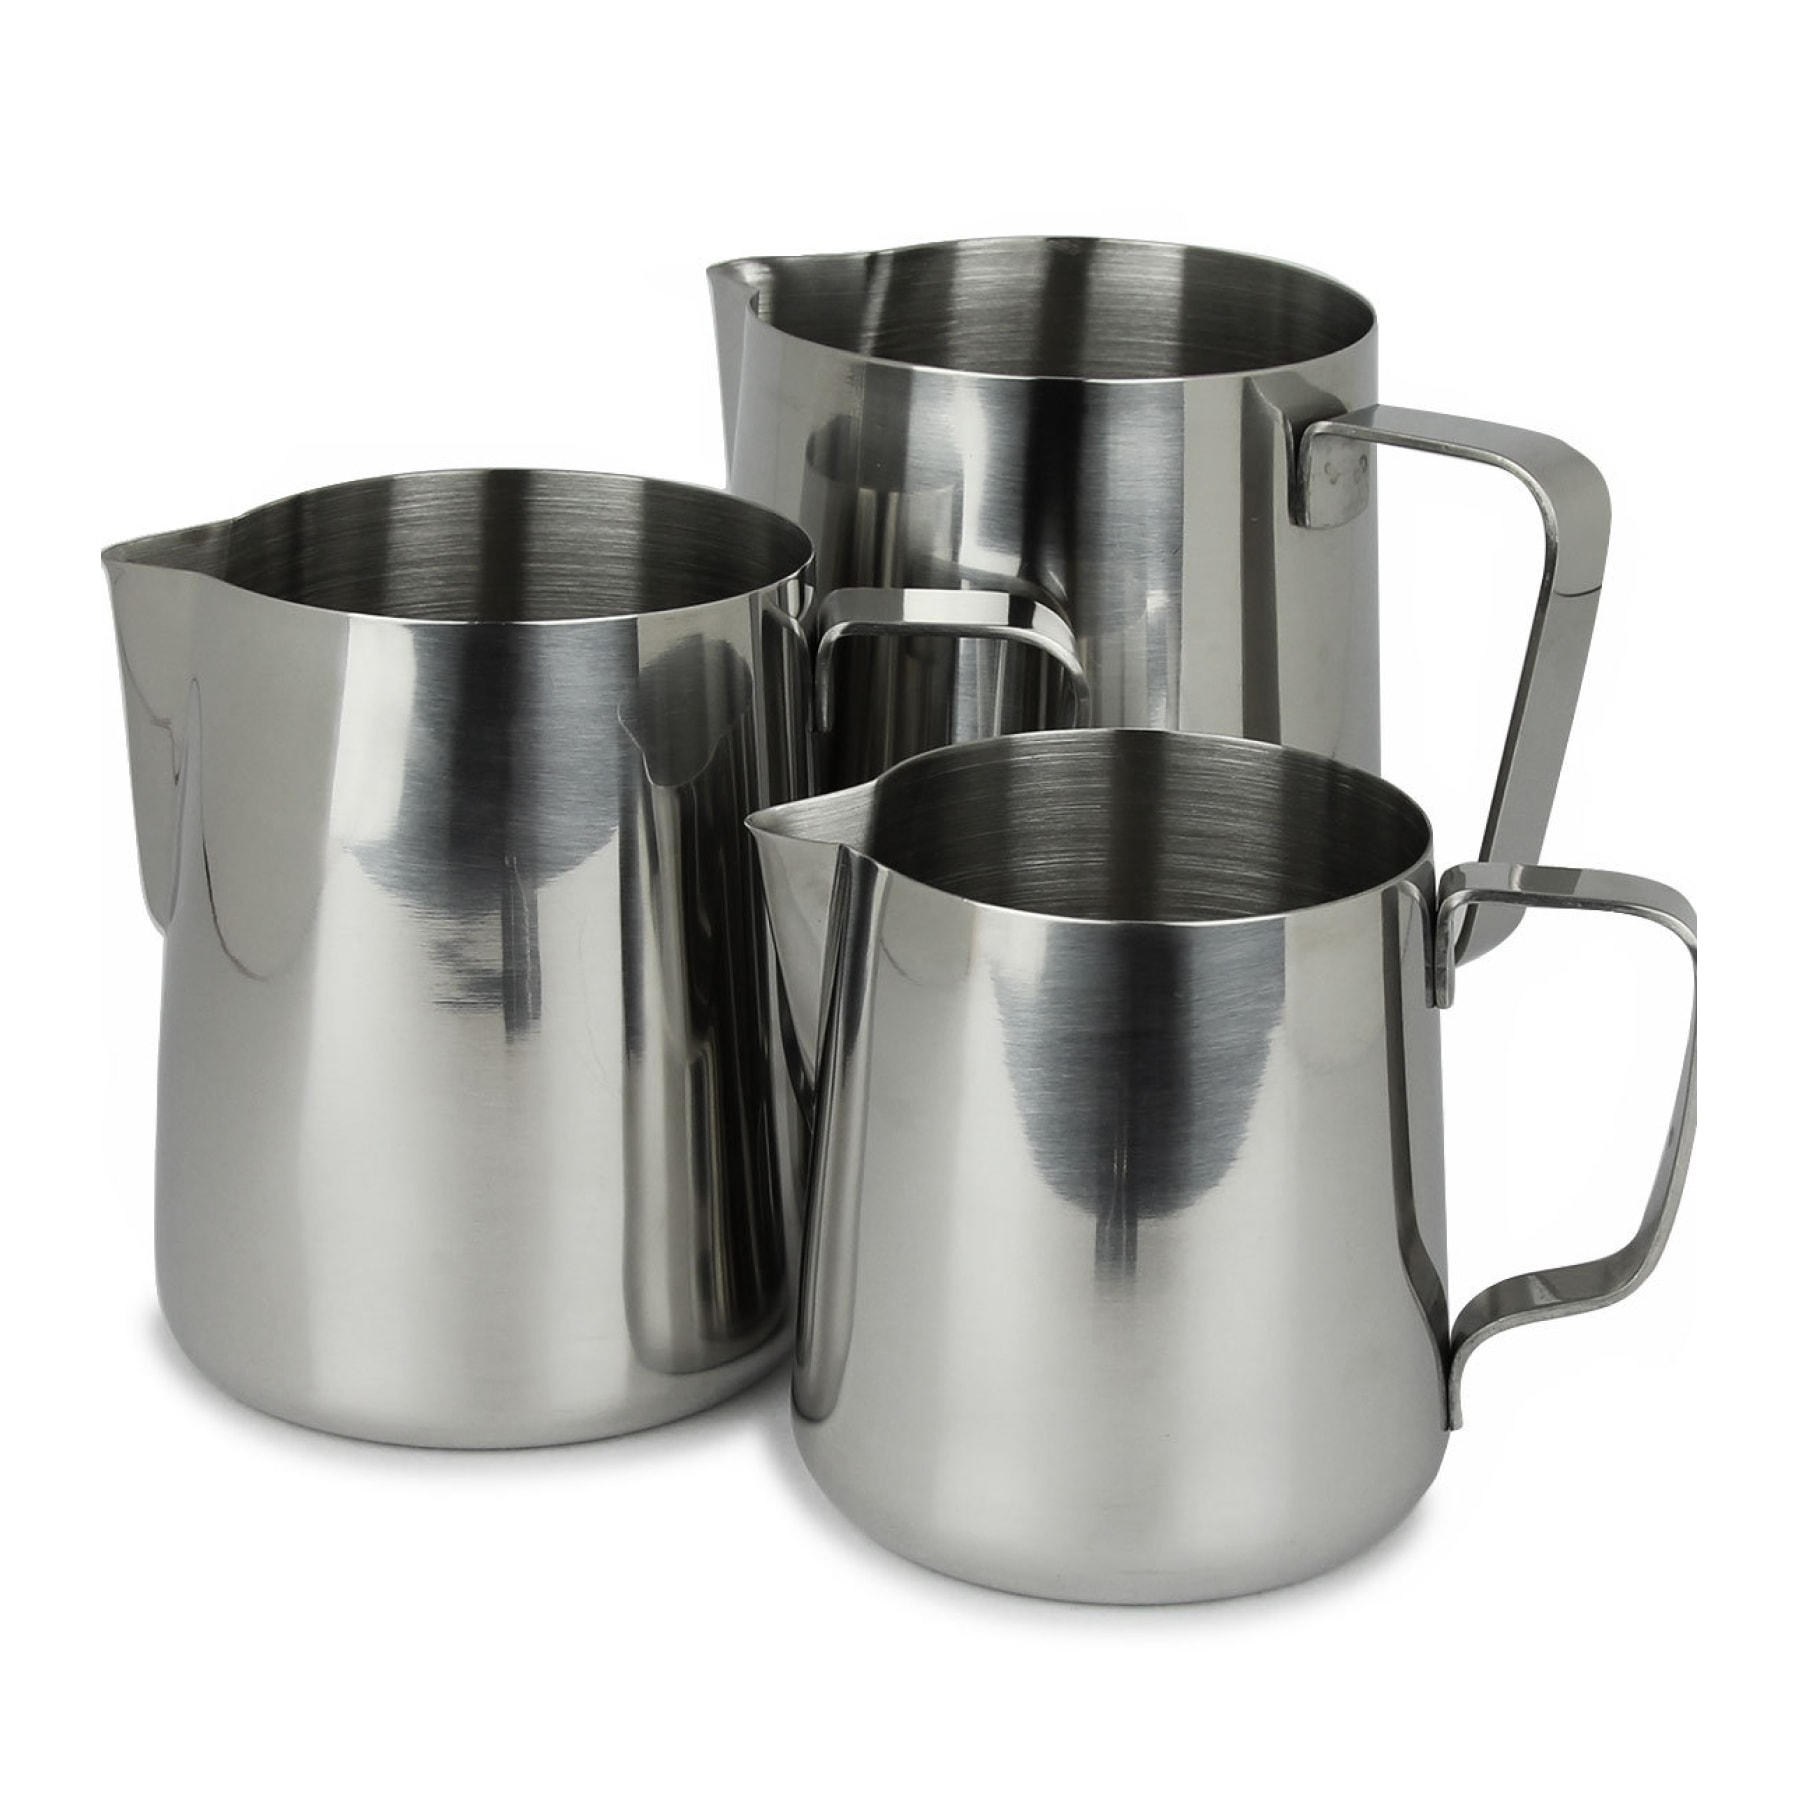 Stainless Steel Milk Pouring Jug - 950ml